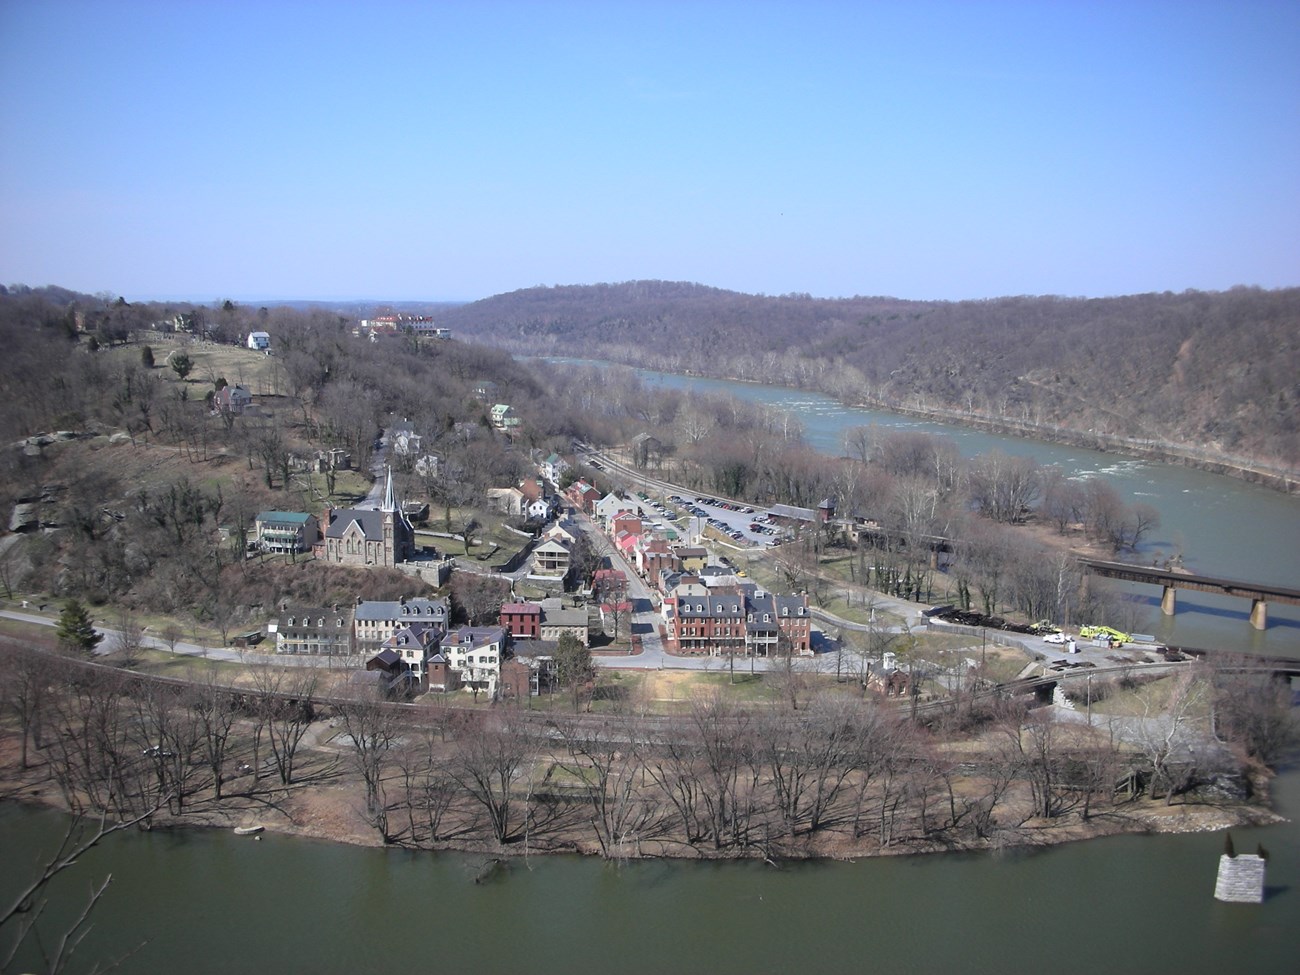 Comparative photo of the town of Harpers Ferry in 2008 taken from Loudoun Heights. Town from St. Peter's Roman Catholic Church to the Point is shown. The town is absent of an Armory.